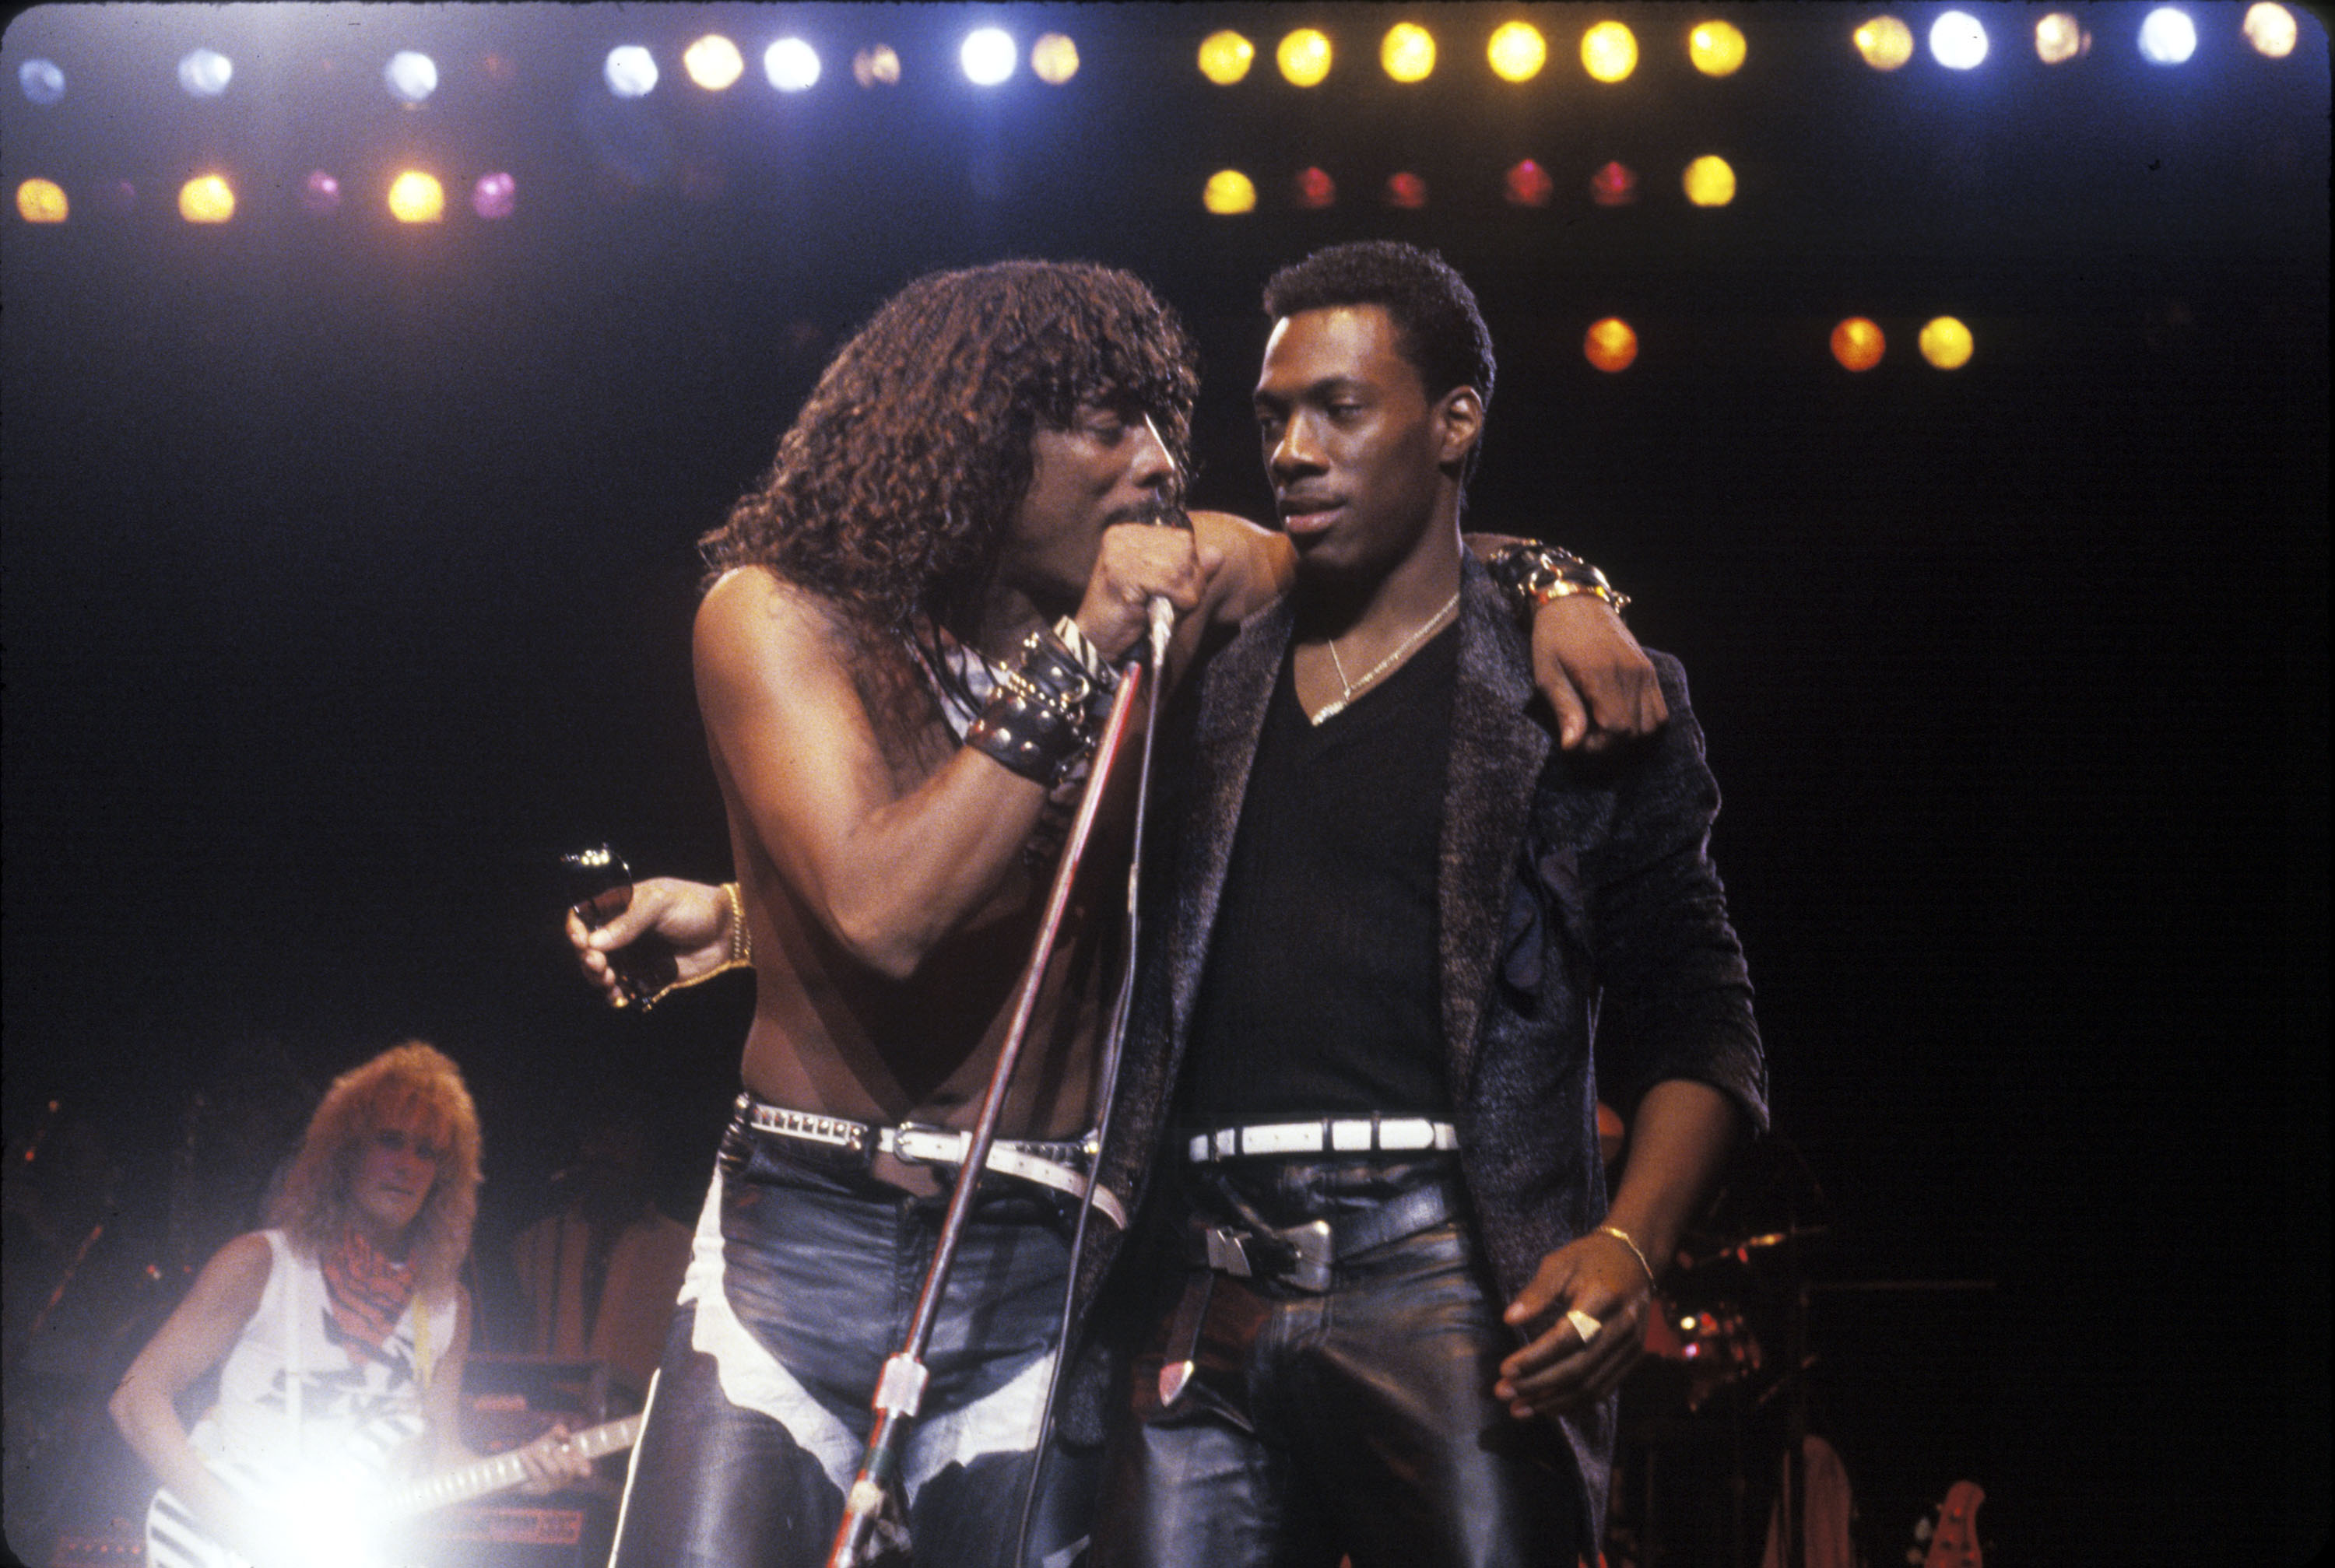 Eddie Murphy Was Snowed In At Rick James’ House While Recording “Party All The Time”